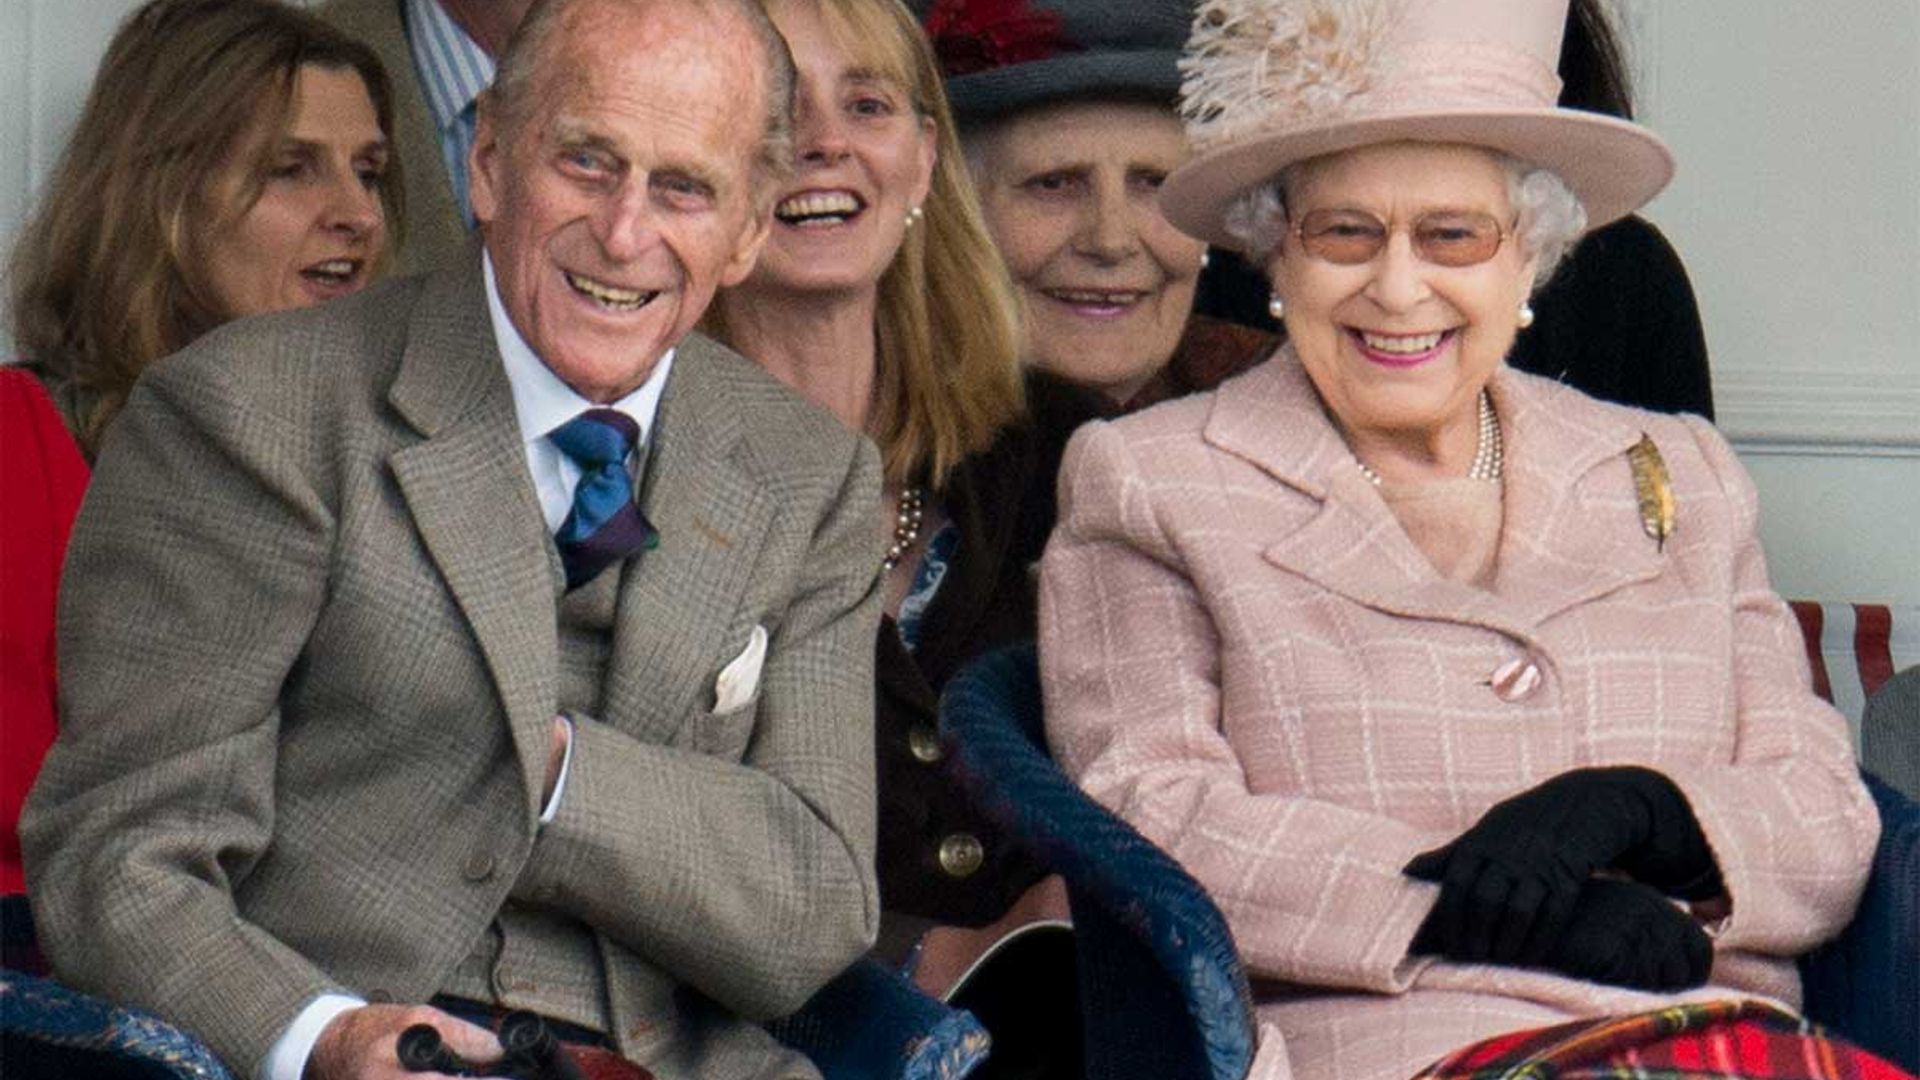 The Queen and Prince Philip arrive at Balmoral to start summer break